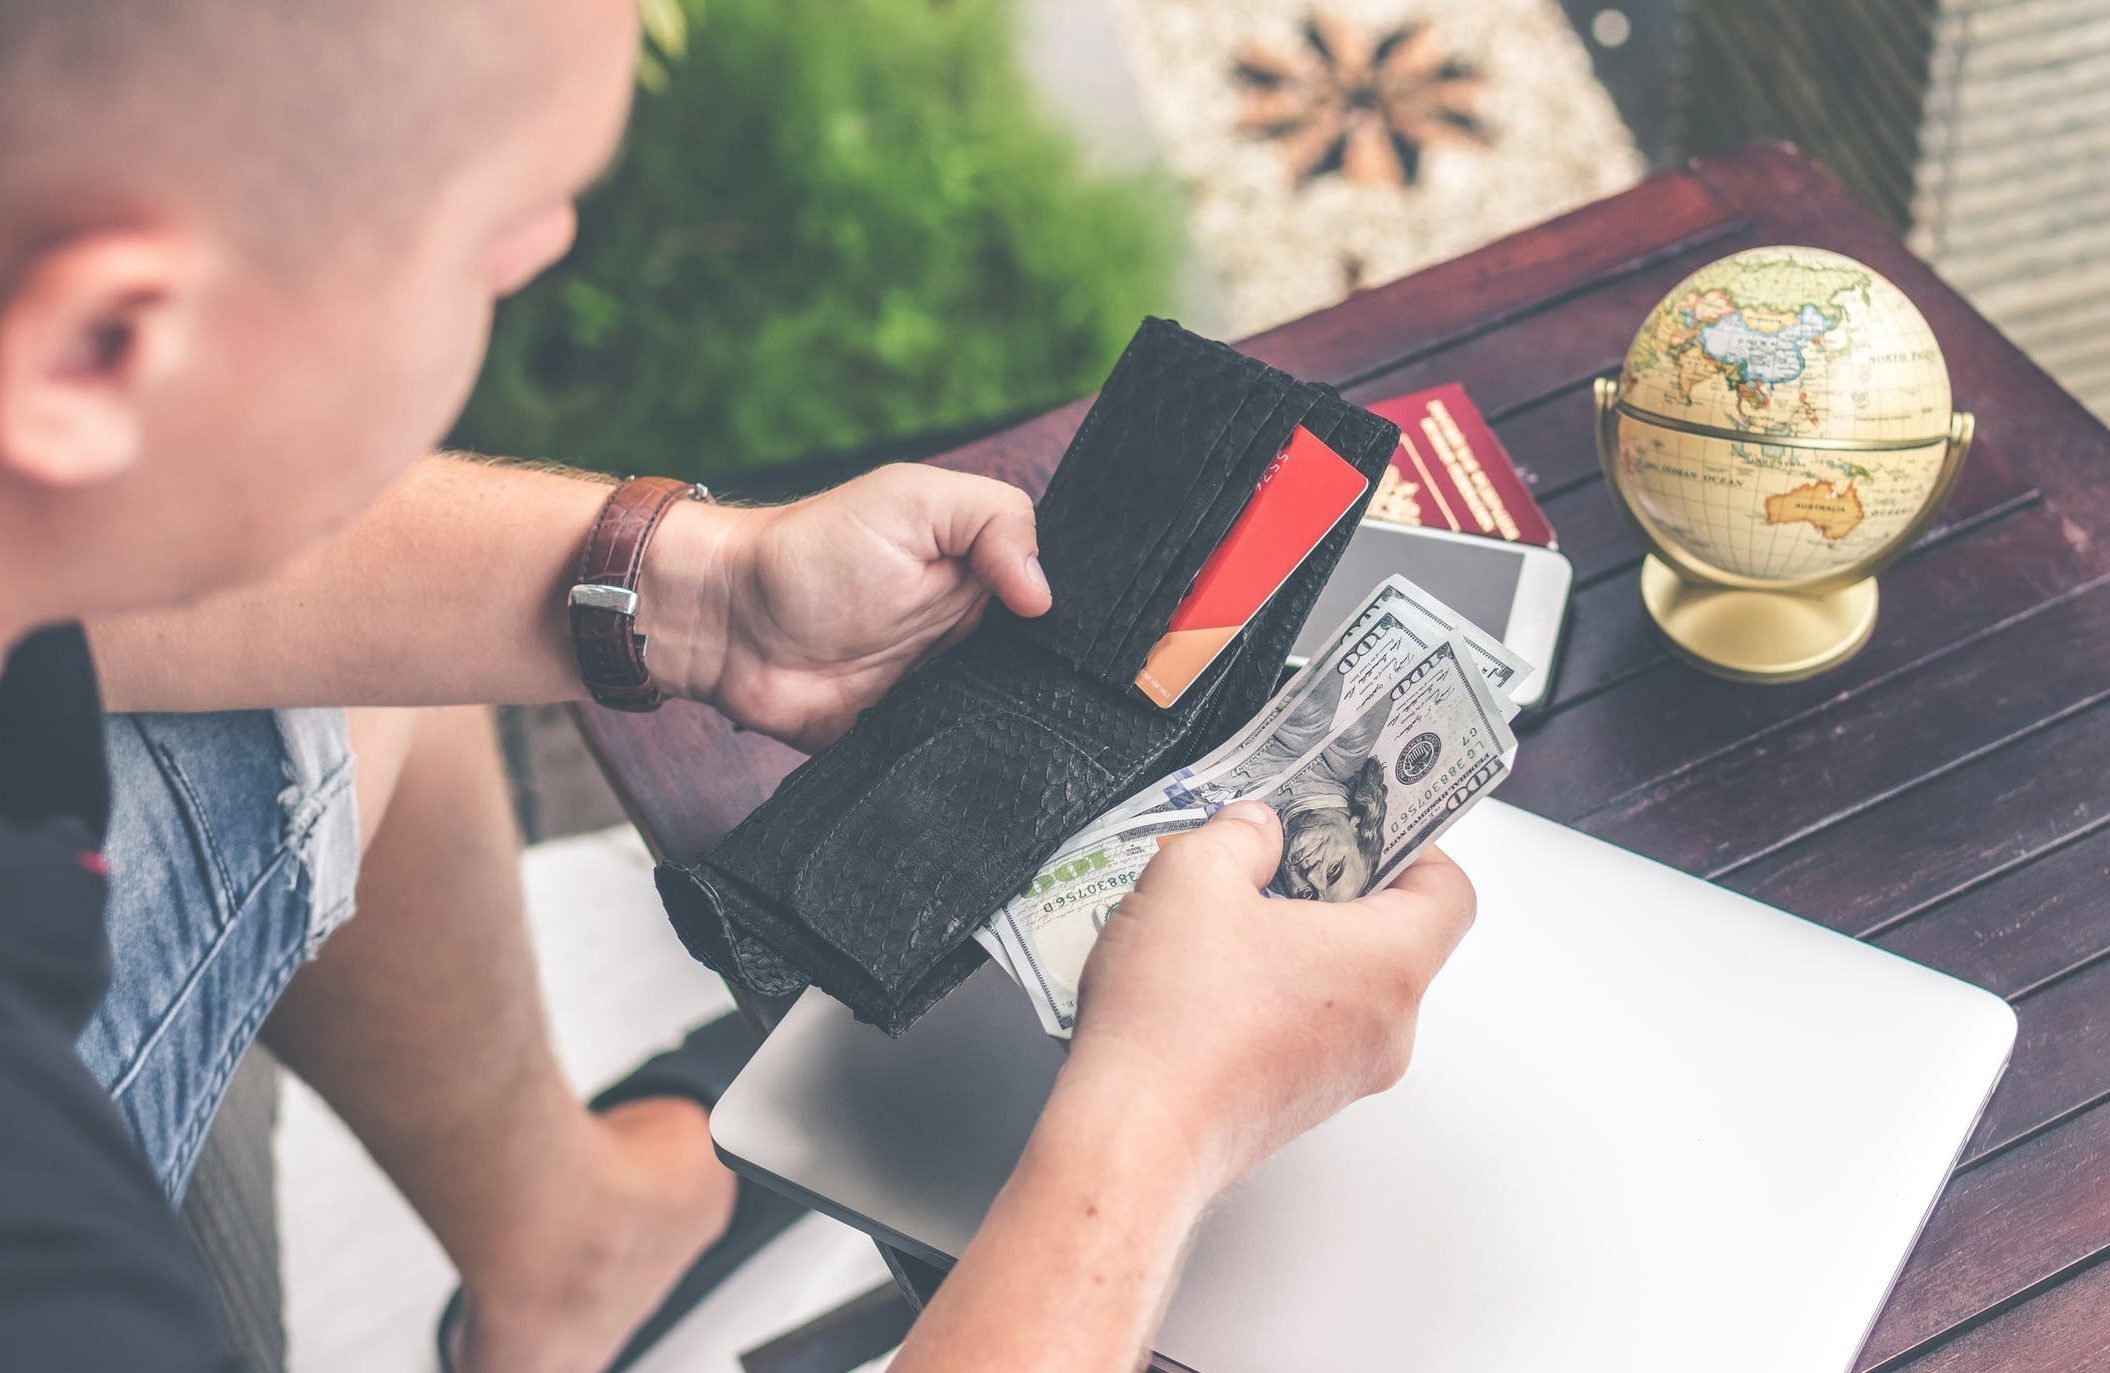 Man holding a purse with cash and credit cards.